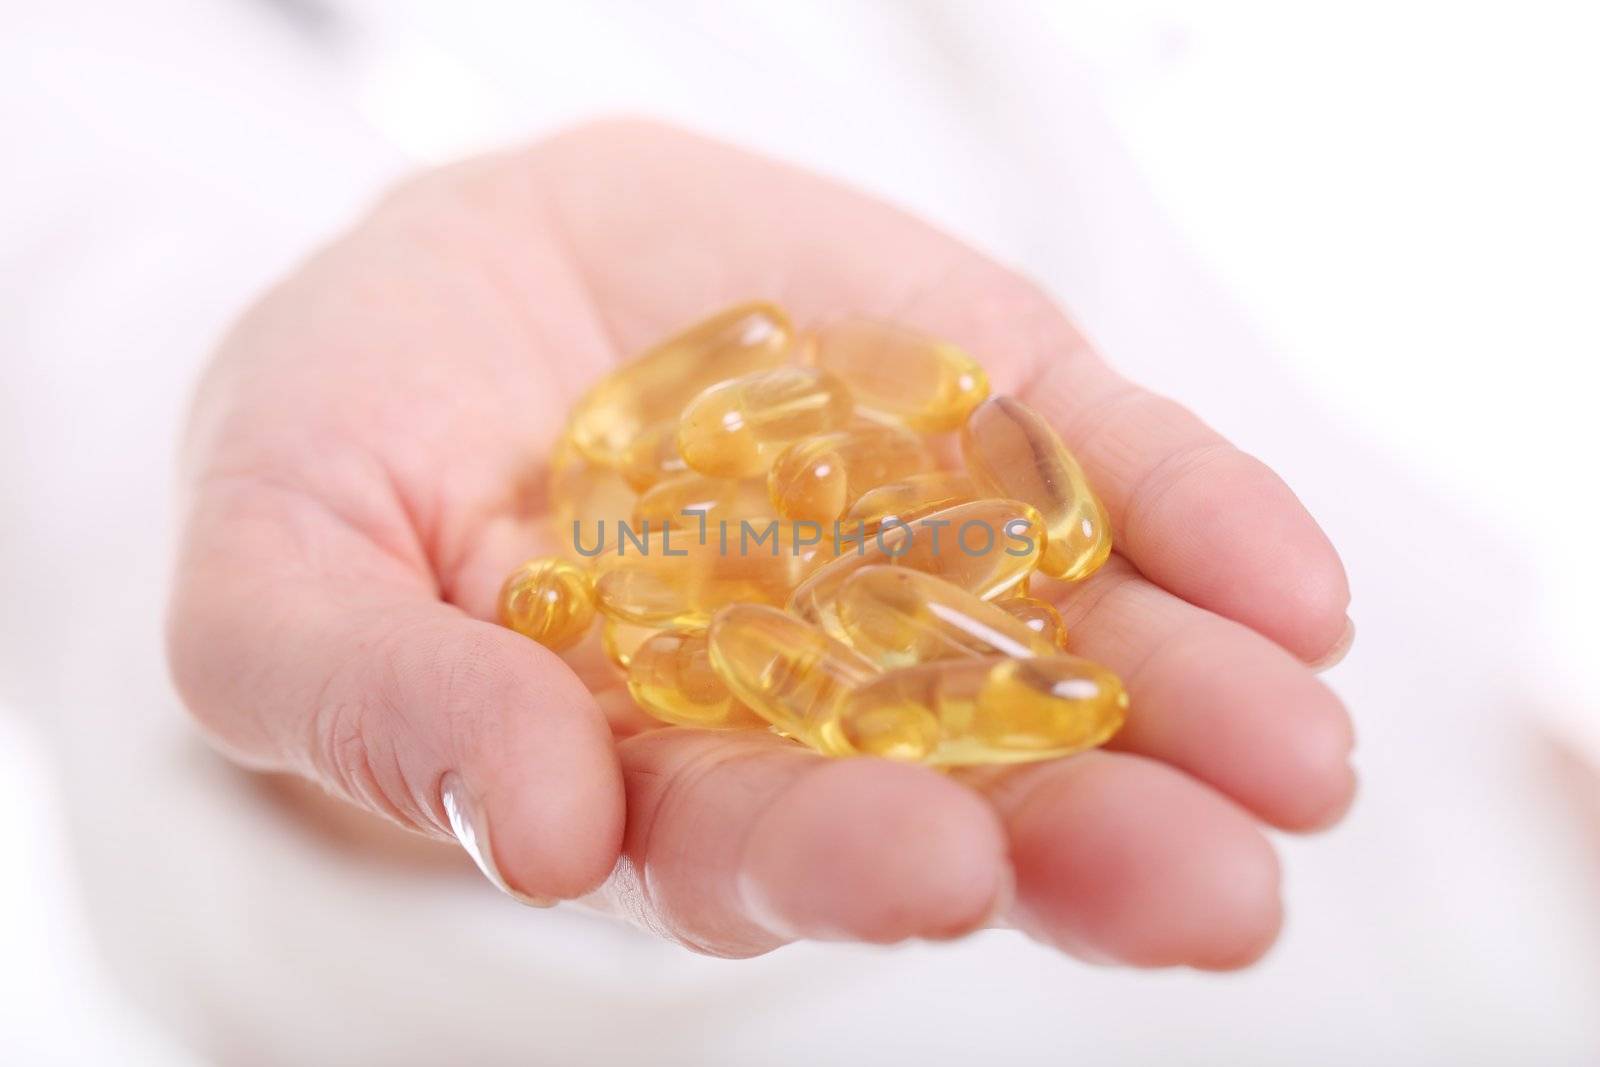 Close up of doc hand holding pills isolated on a white